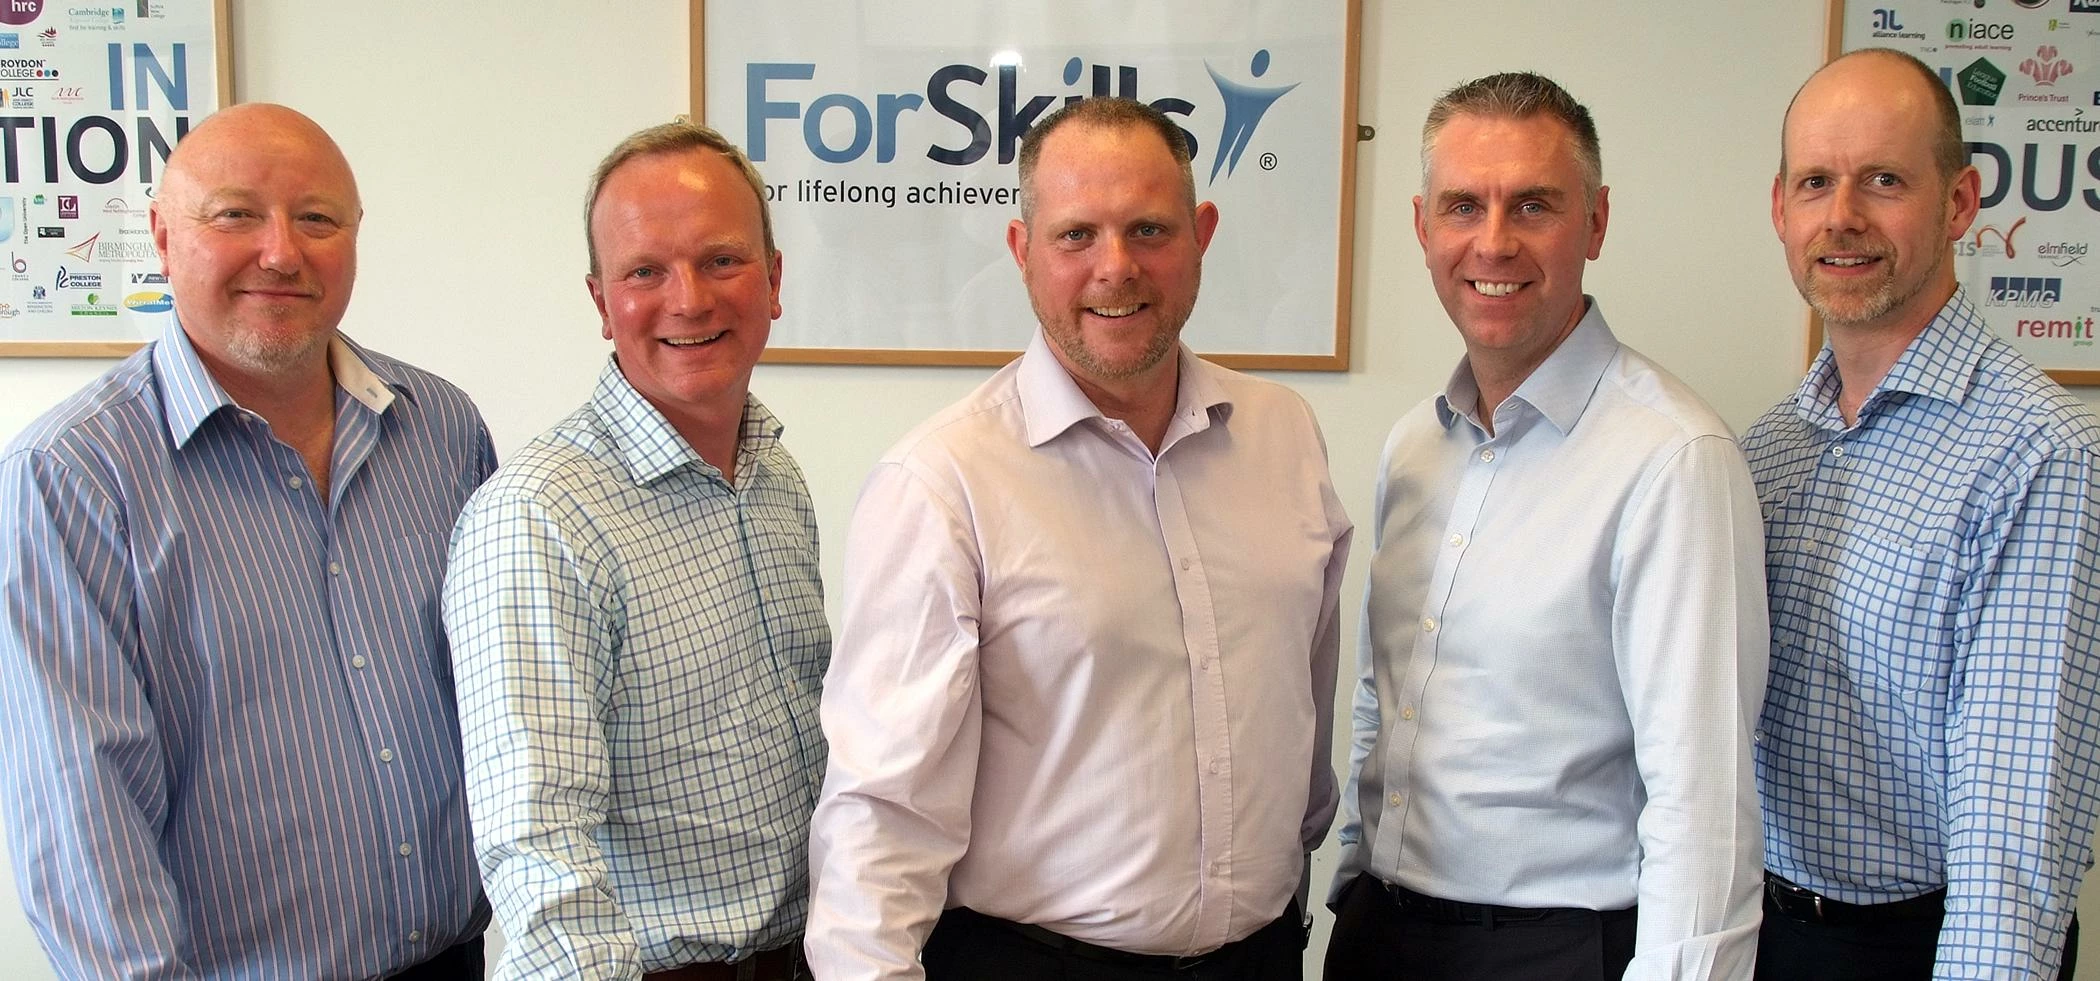 Left to right: Jonathan Wells, ForSkills Marketing Director; David Grailey, NCFE Chief Executive; My